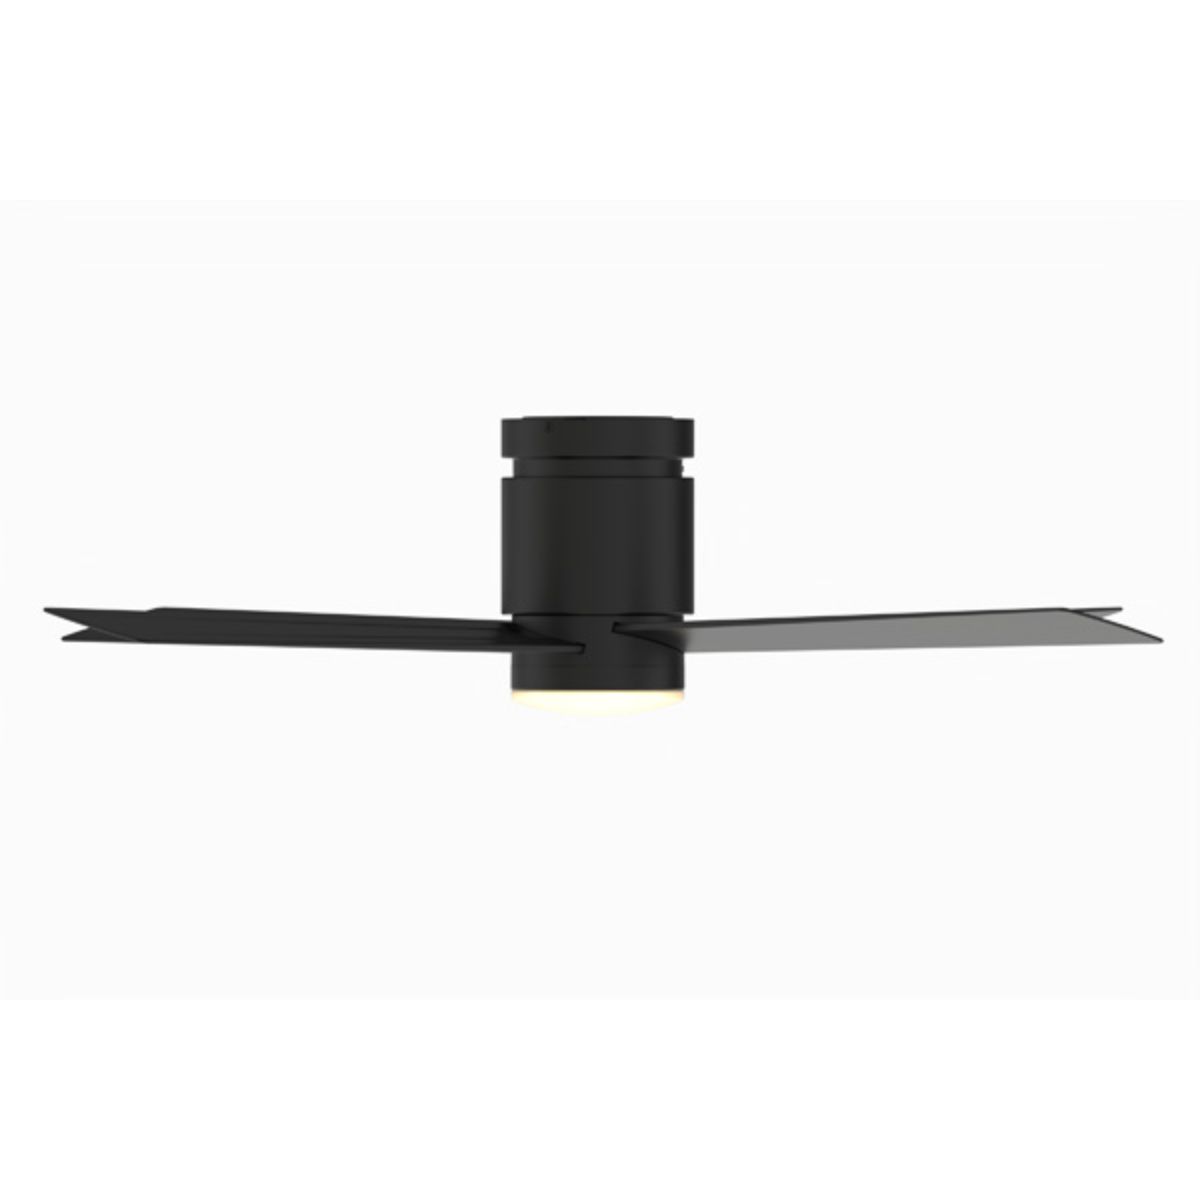 Kwartet 52 In. Low Profile Outdoor Ceiling Fan With CCT Select Light Kit and Remote